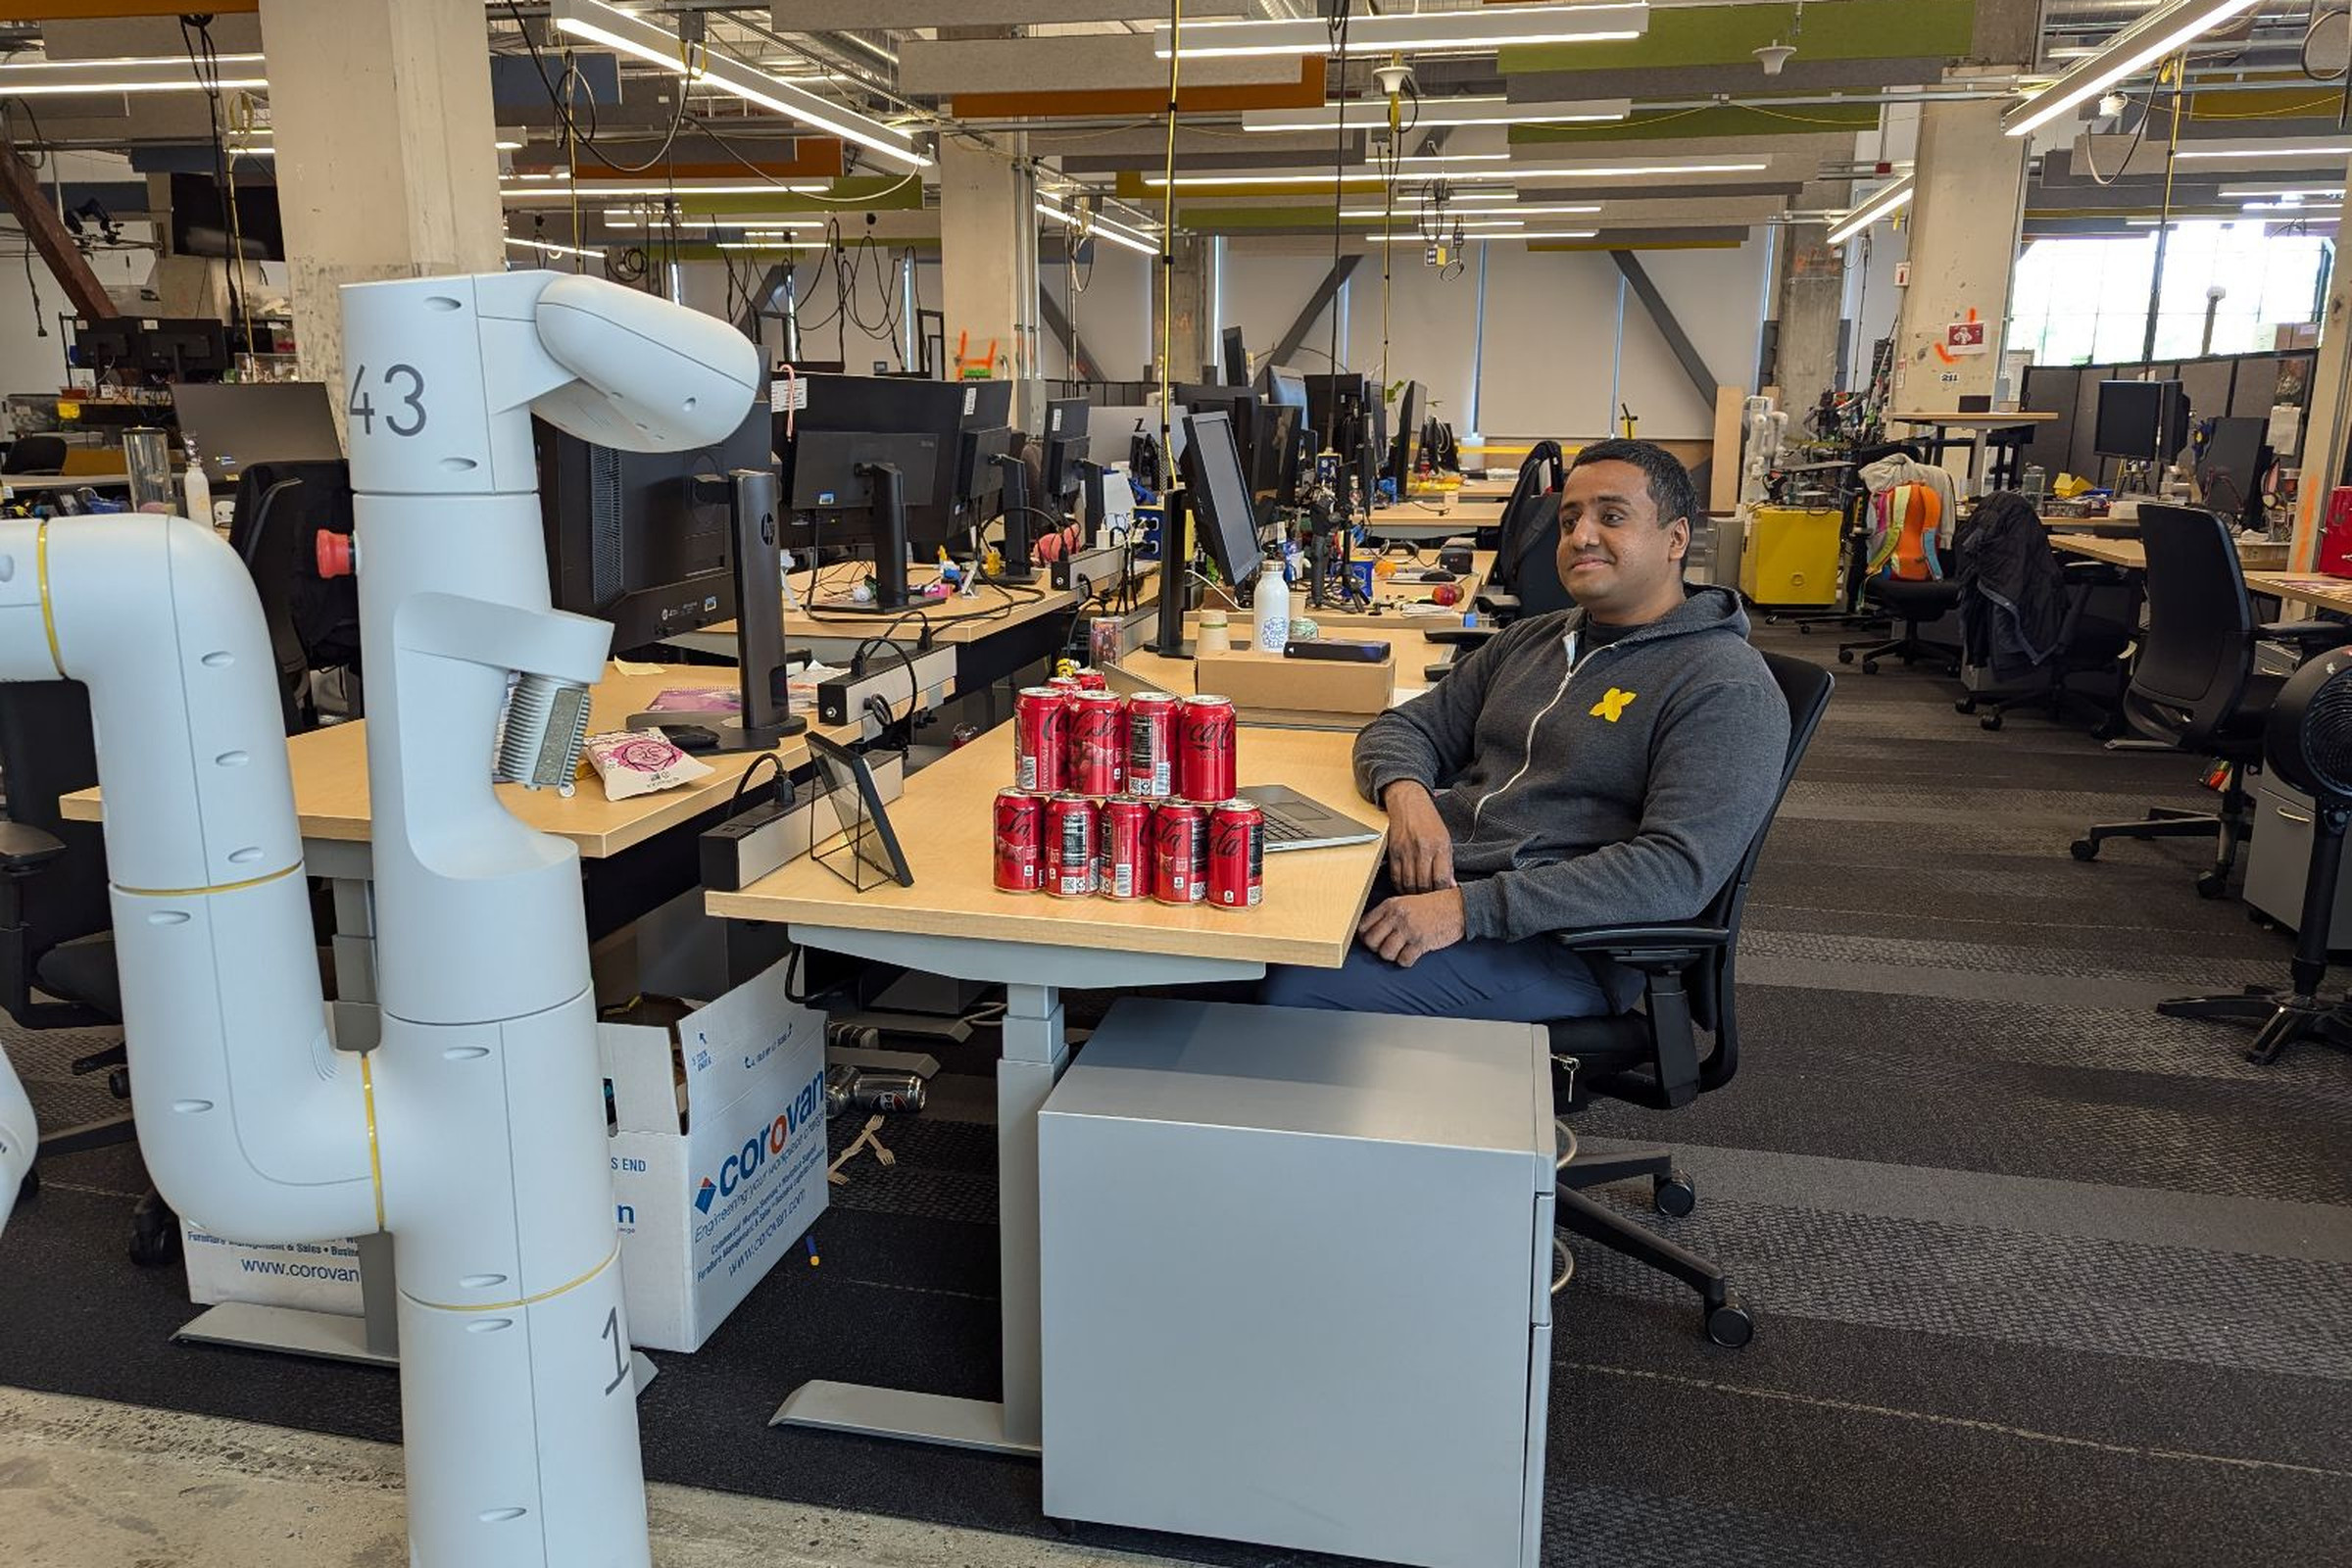 A Google DeepMind worker training a robot to understand that Coke is his favorite soda.